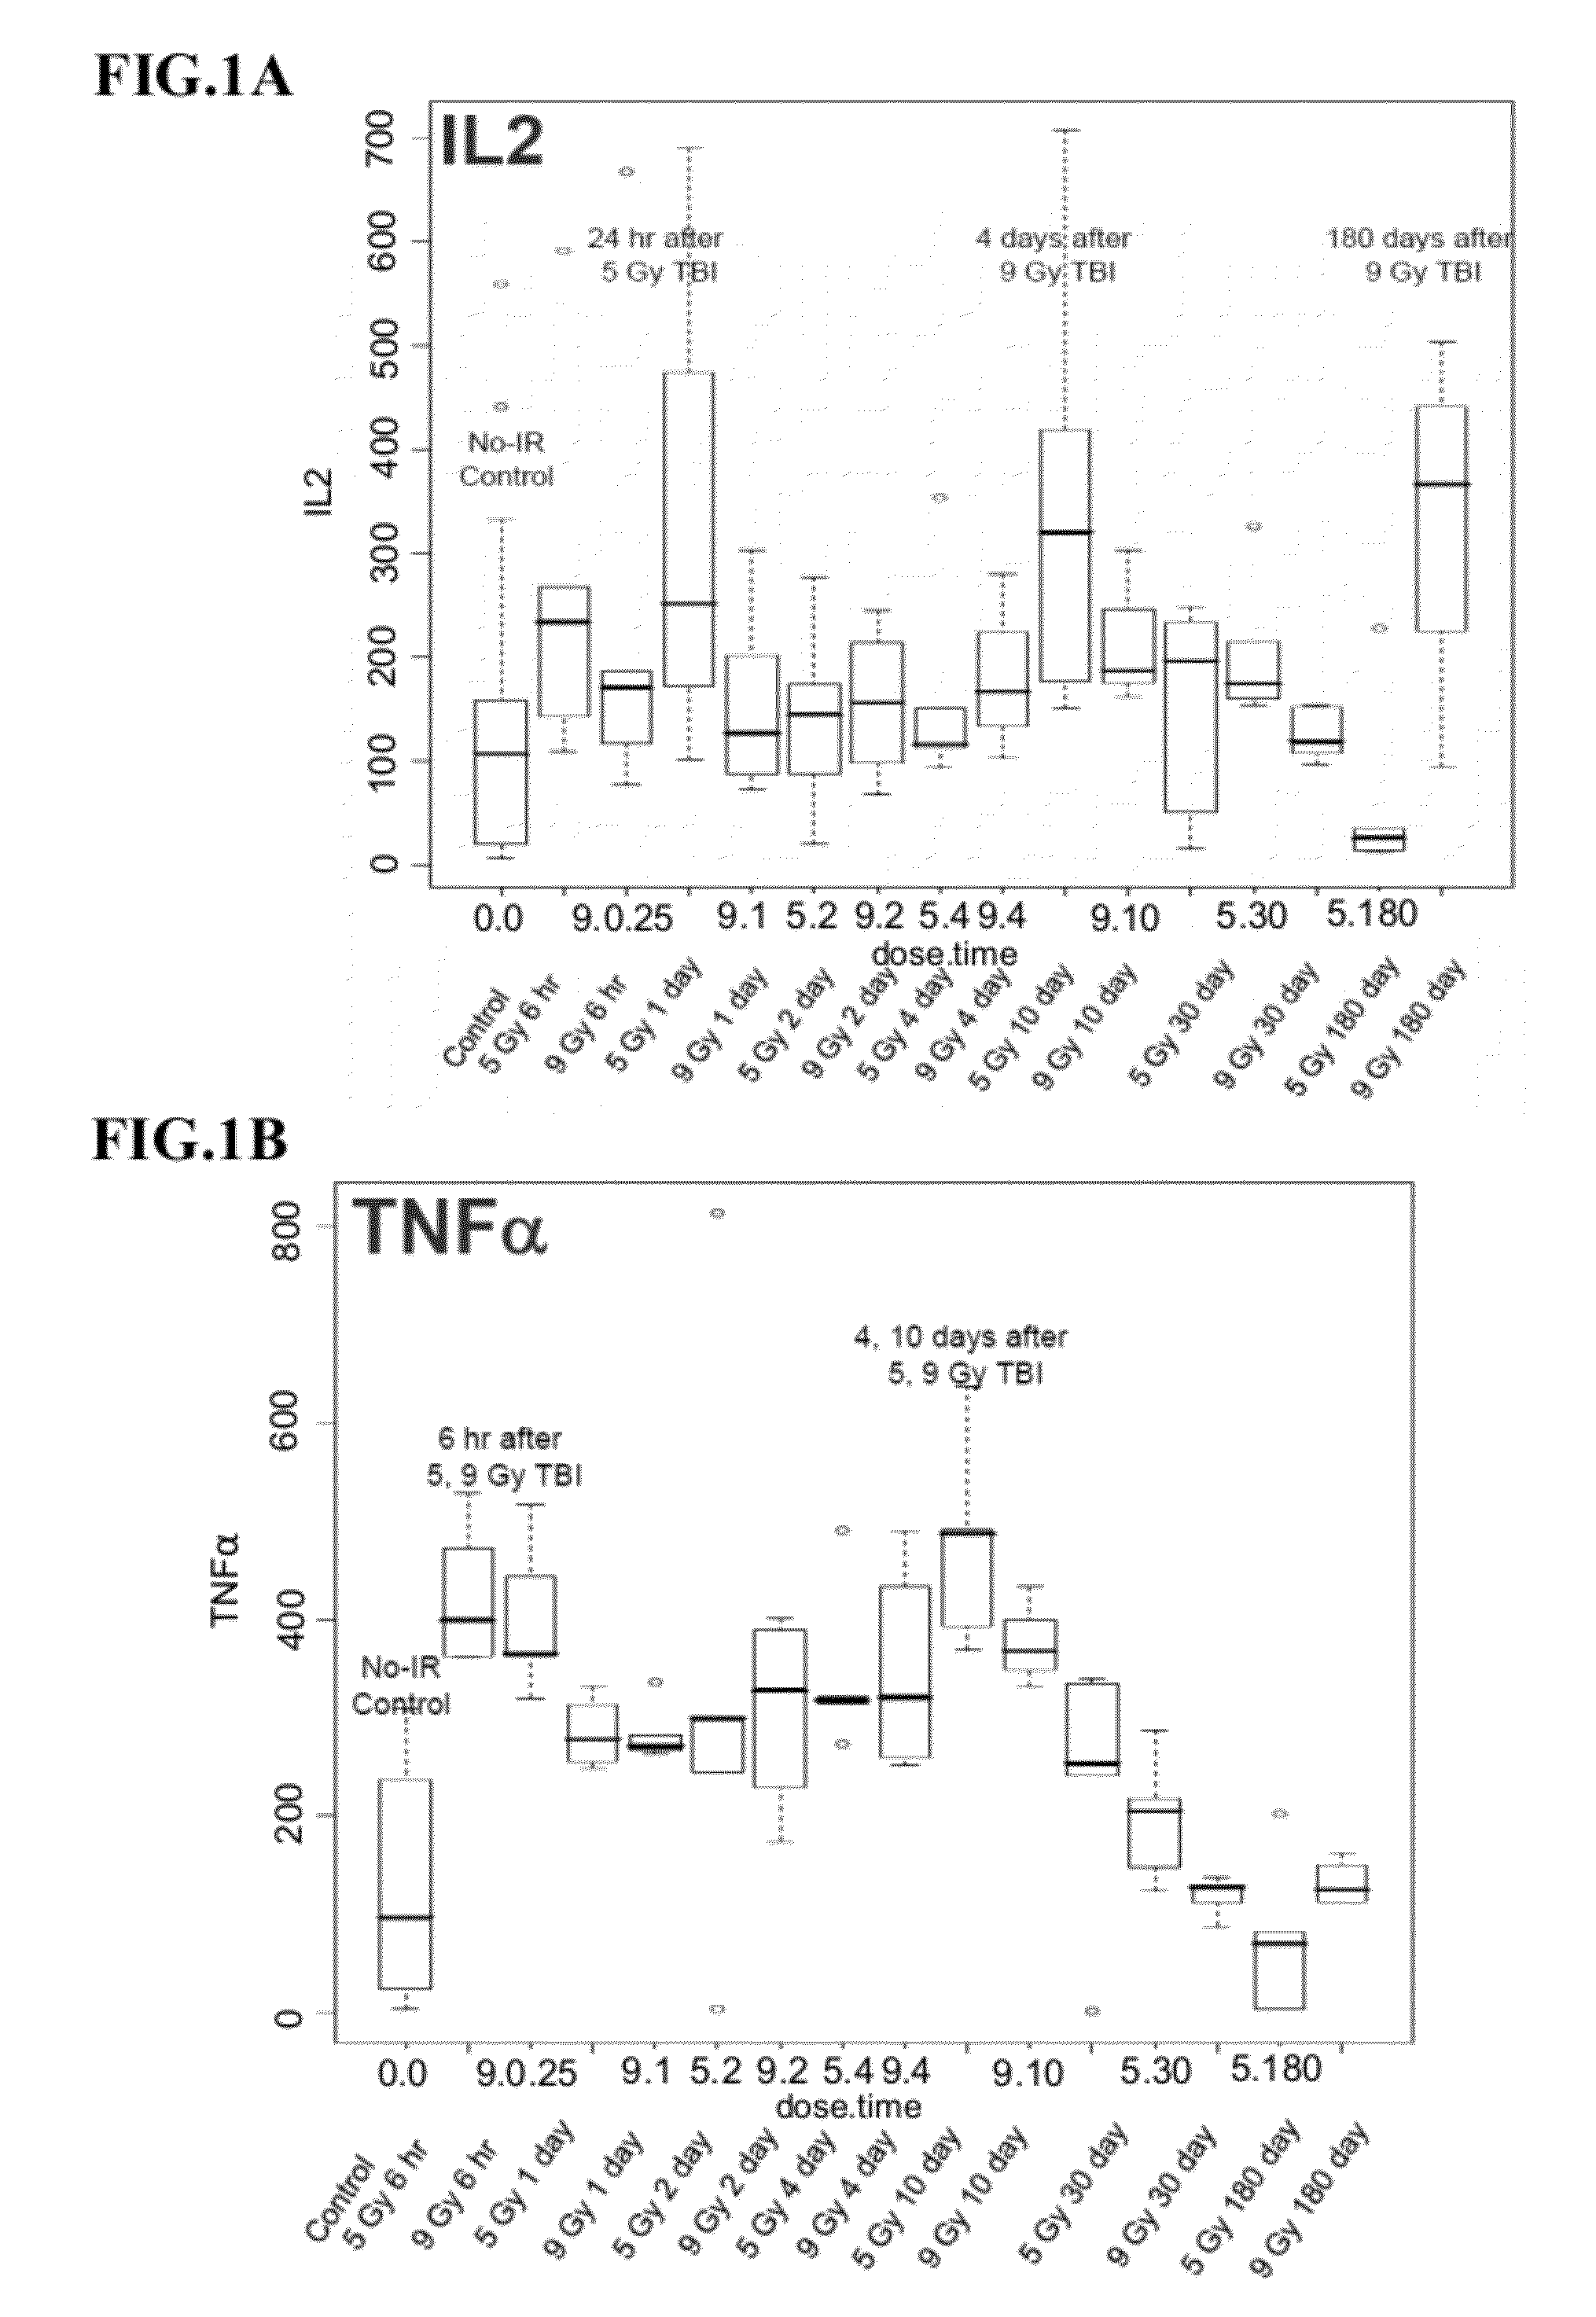 Use of glycyrrhetinic acid, glycyrrhizic acid and related compounds for prevention and/or treatment of pulmonary fibrosis